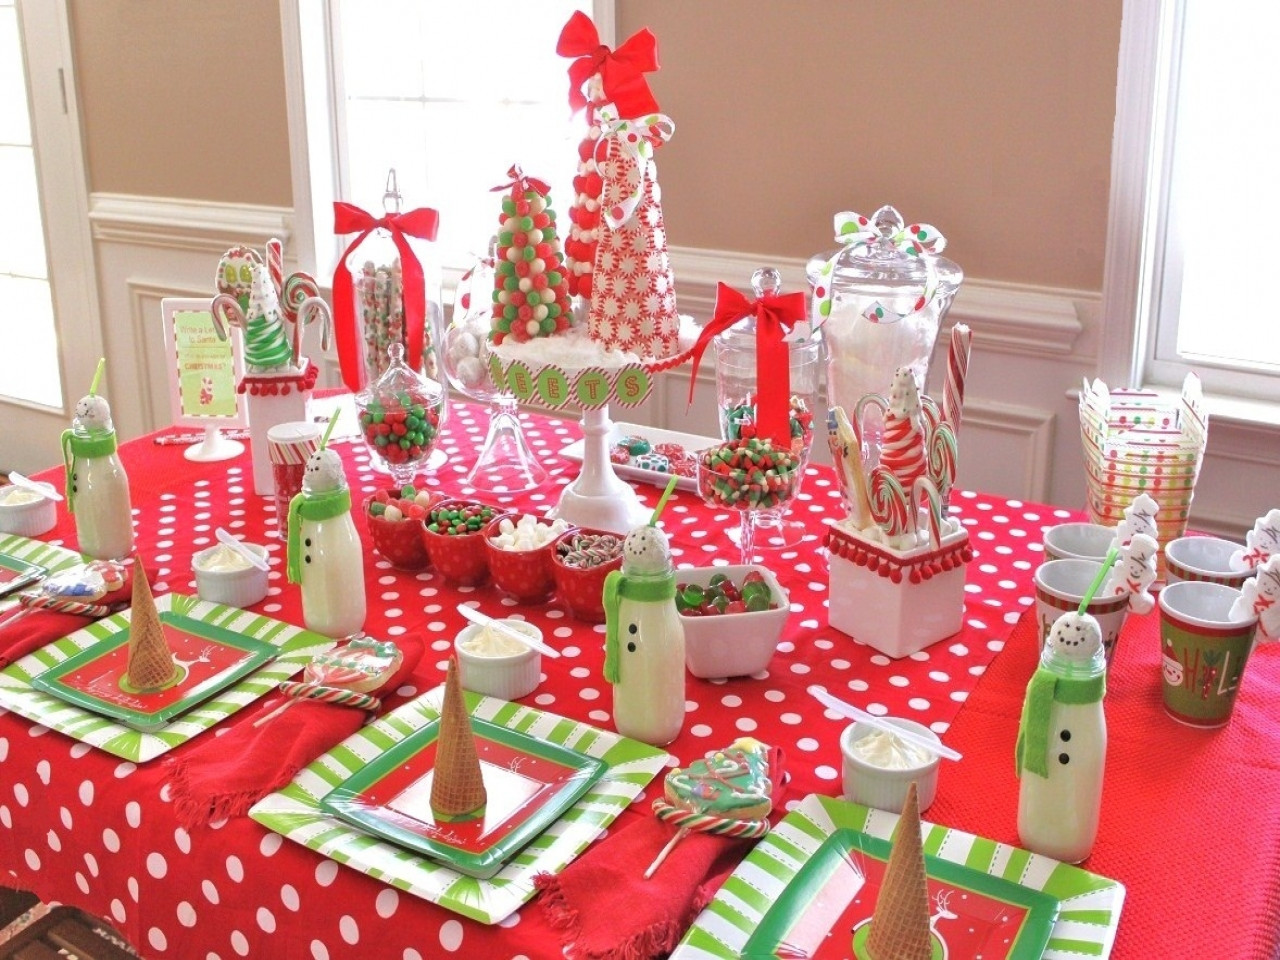 Themed Christmas Party Ideas For Adults
 Bedroom furniture placement ideas kids christmas birthday